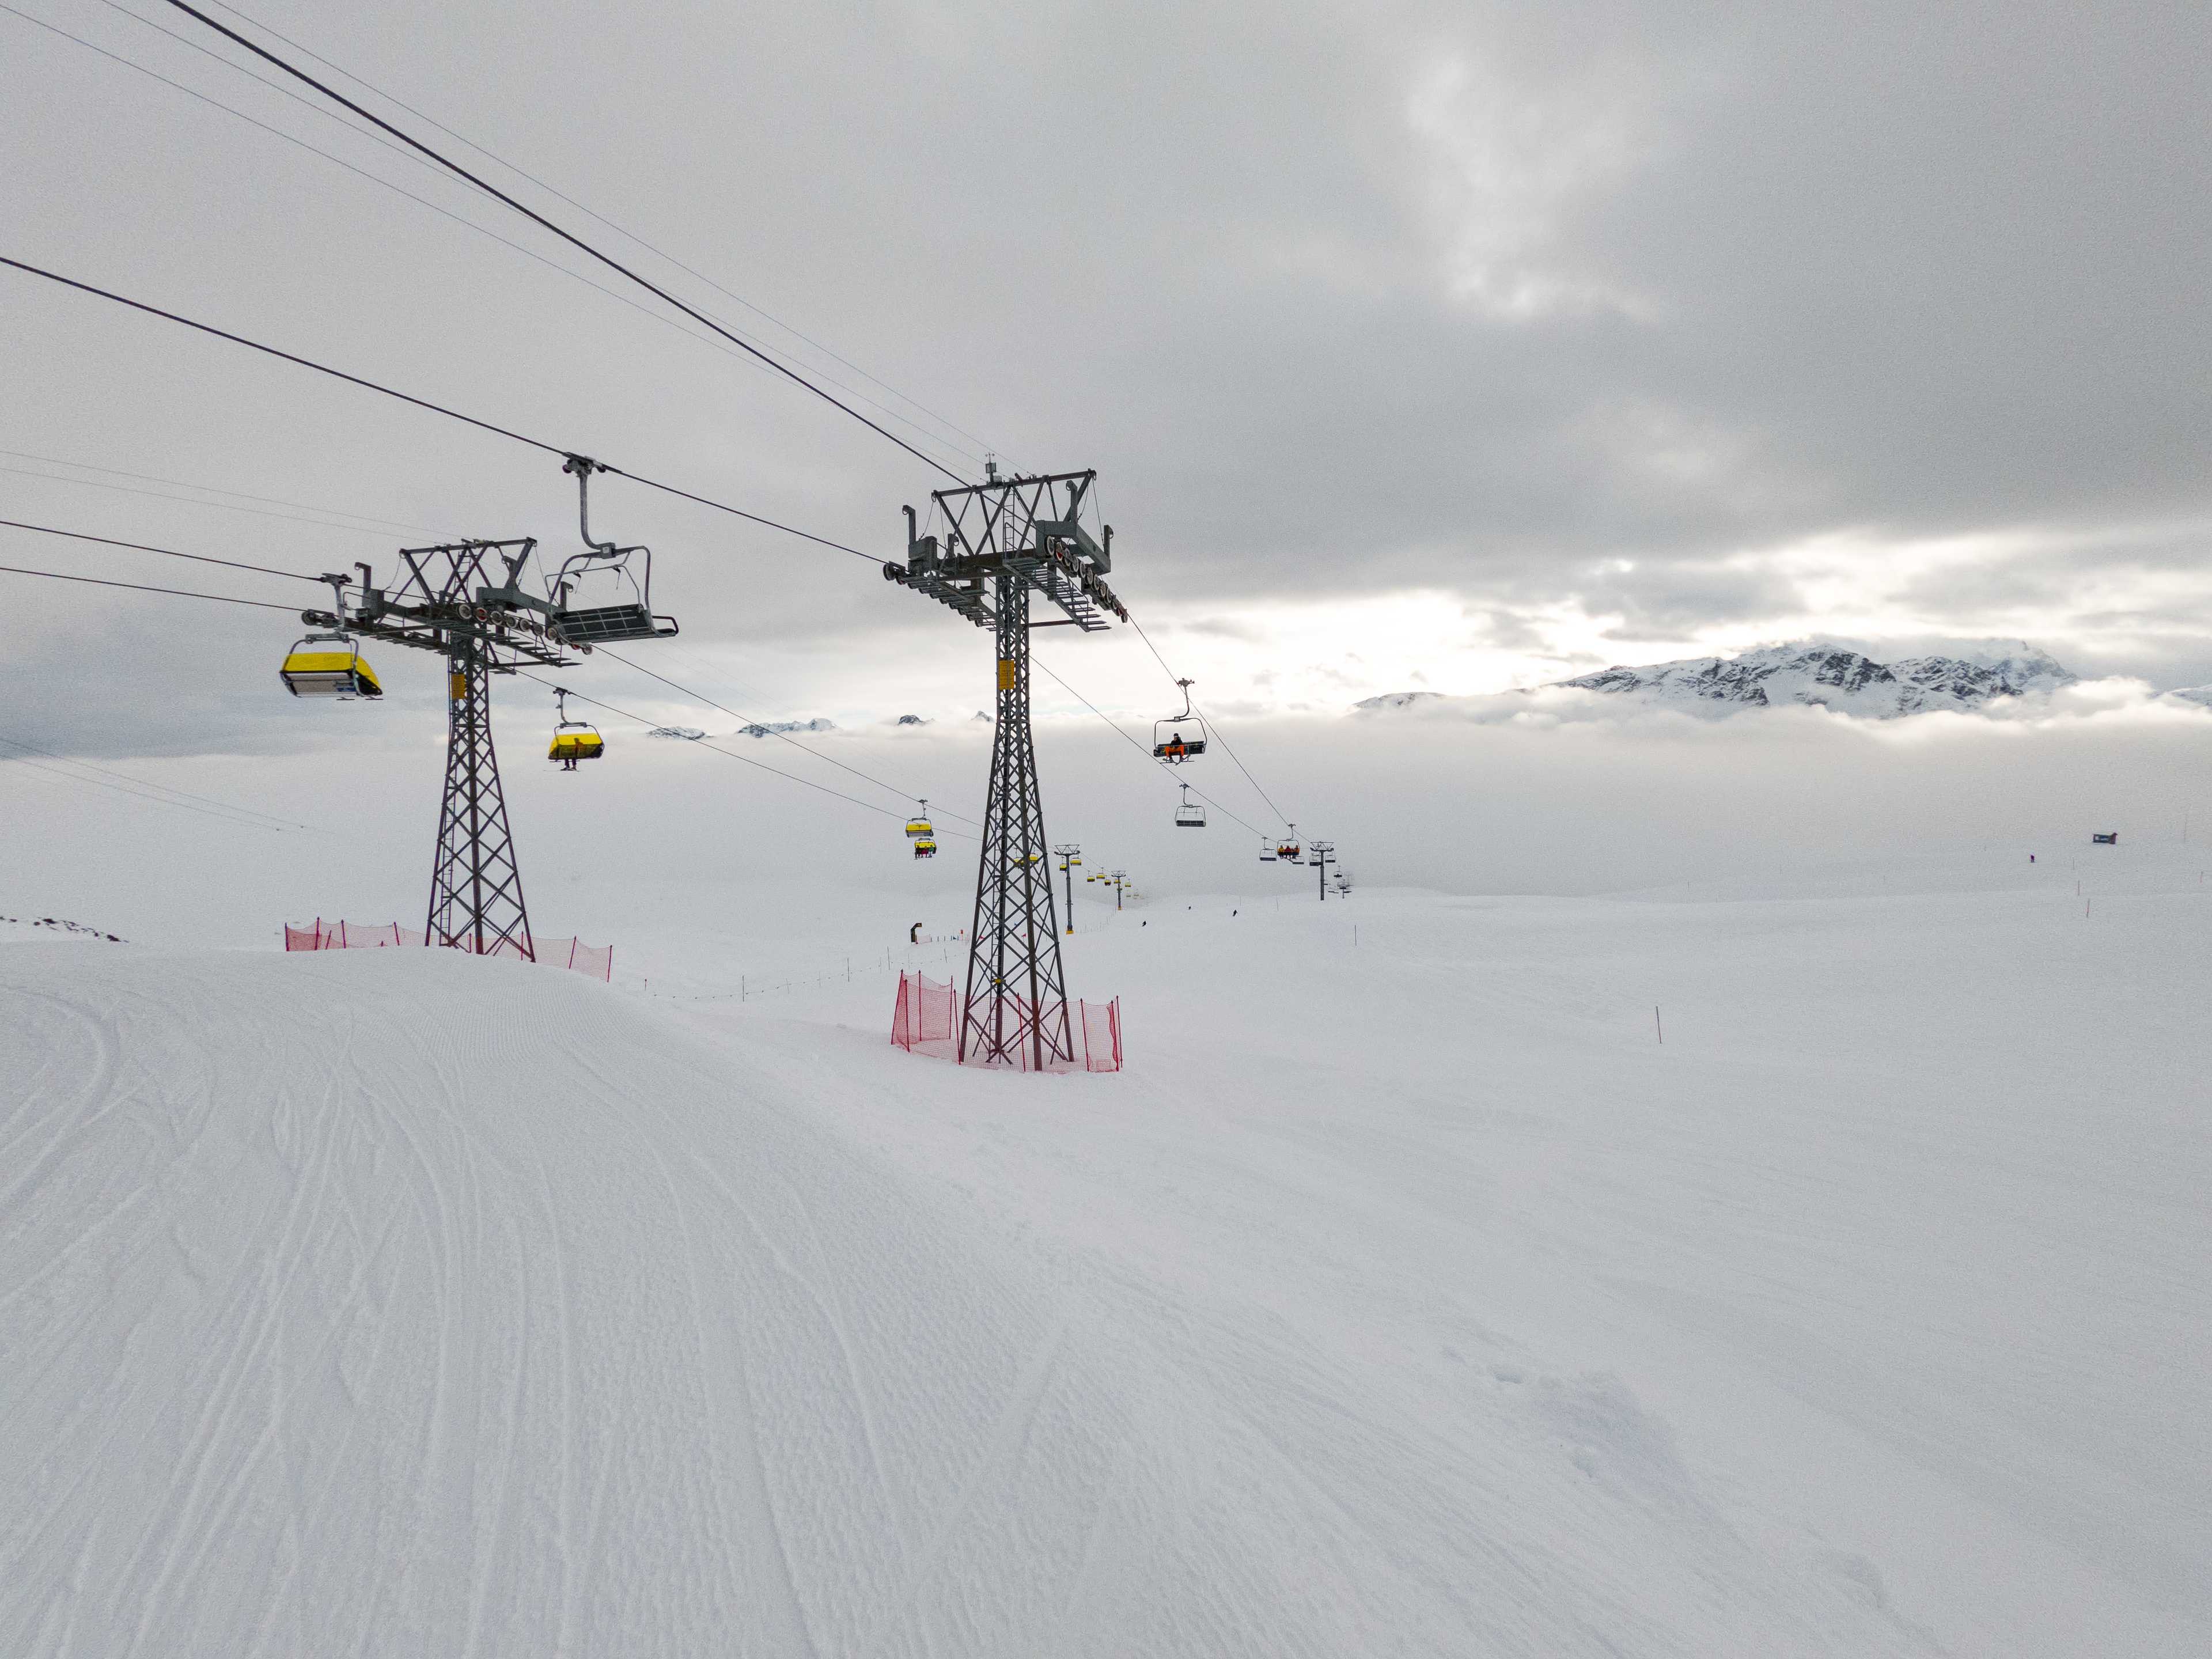 Alp Giop and Salastrains chairlifts, Corviglia, St. Moritz